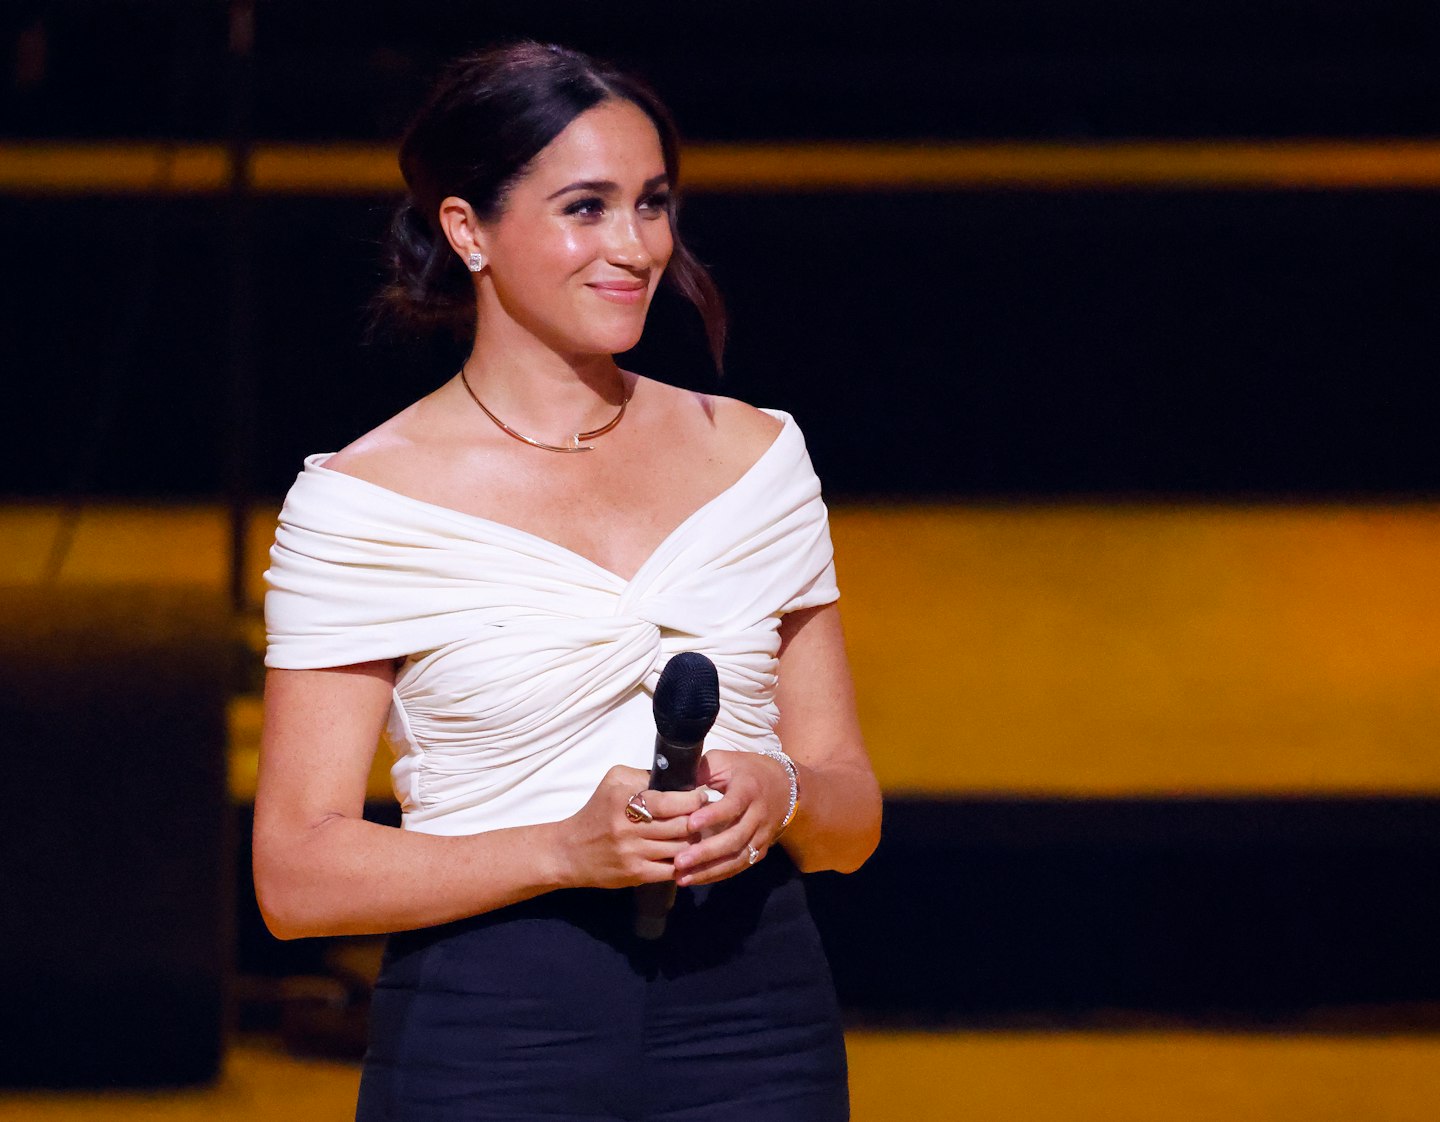 Meghan Markle Fashion: Her Invictus Games 2022 Outfits